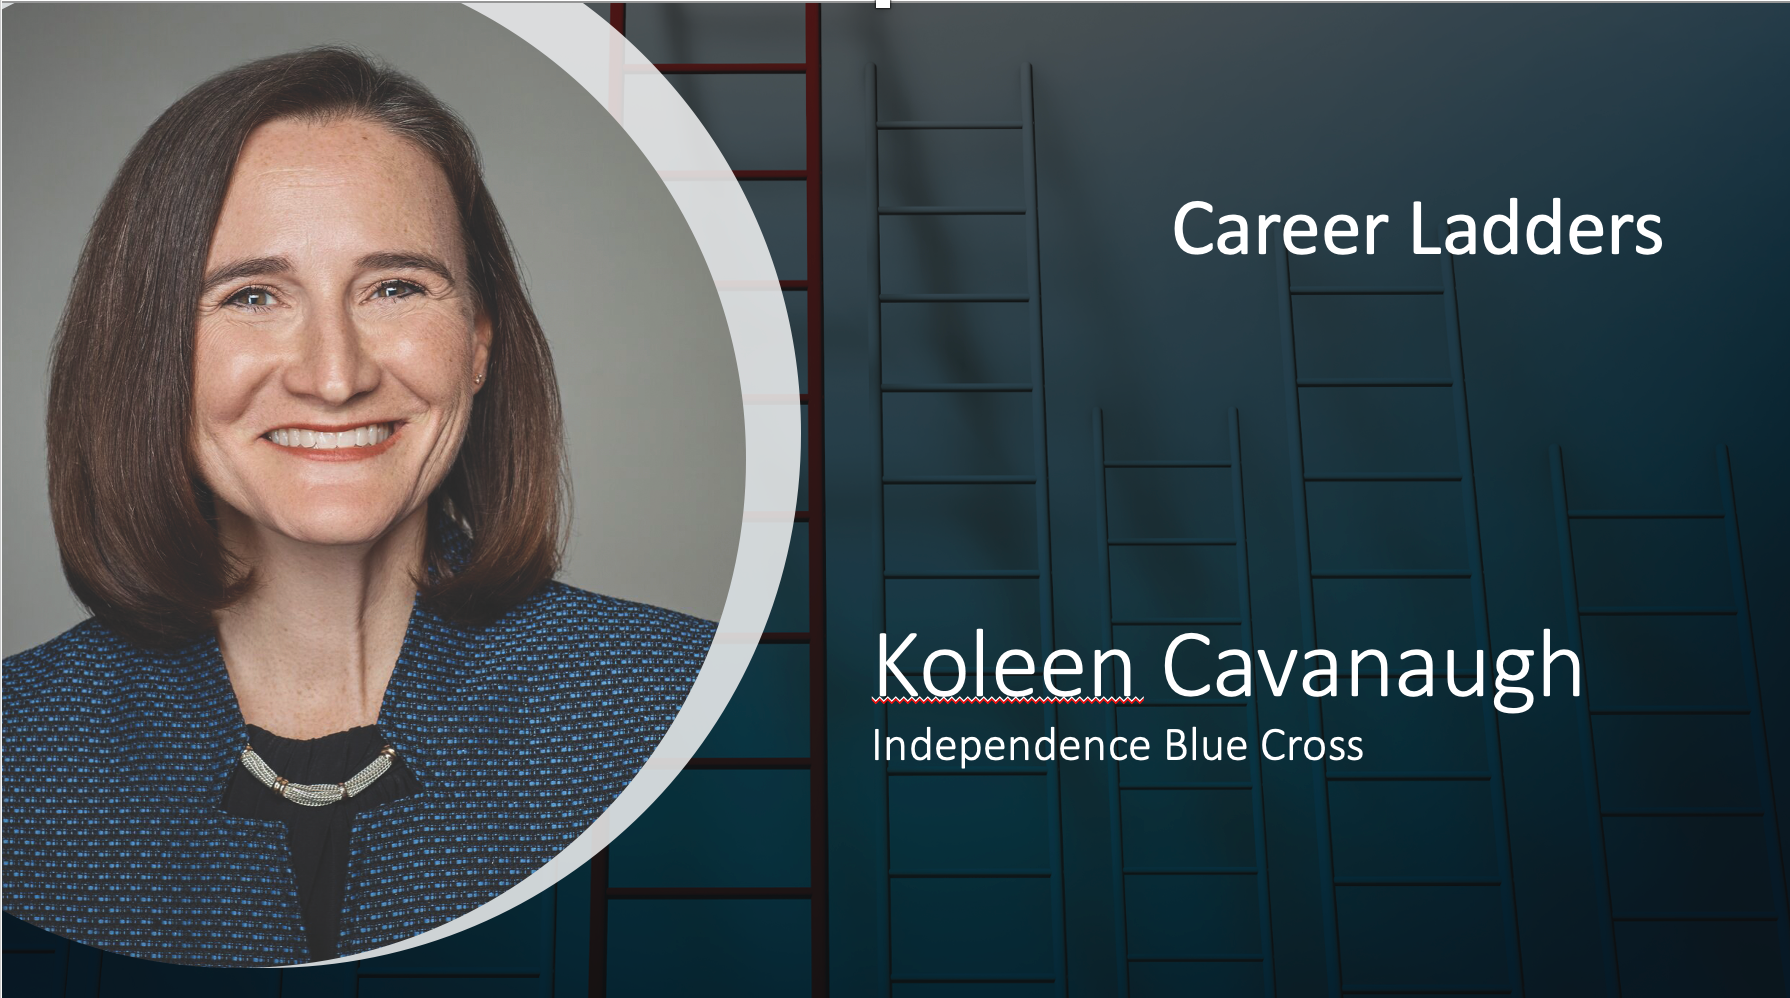 Koleen Cavanaugh, Independence Blue Cross: Understanding Gained at the Entry Level Pays Off